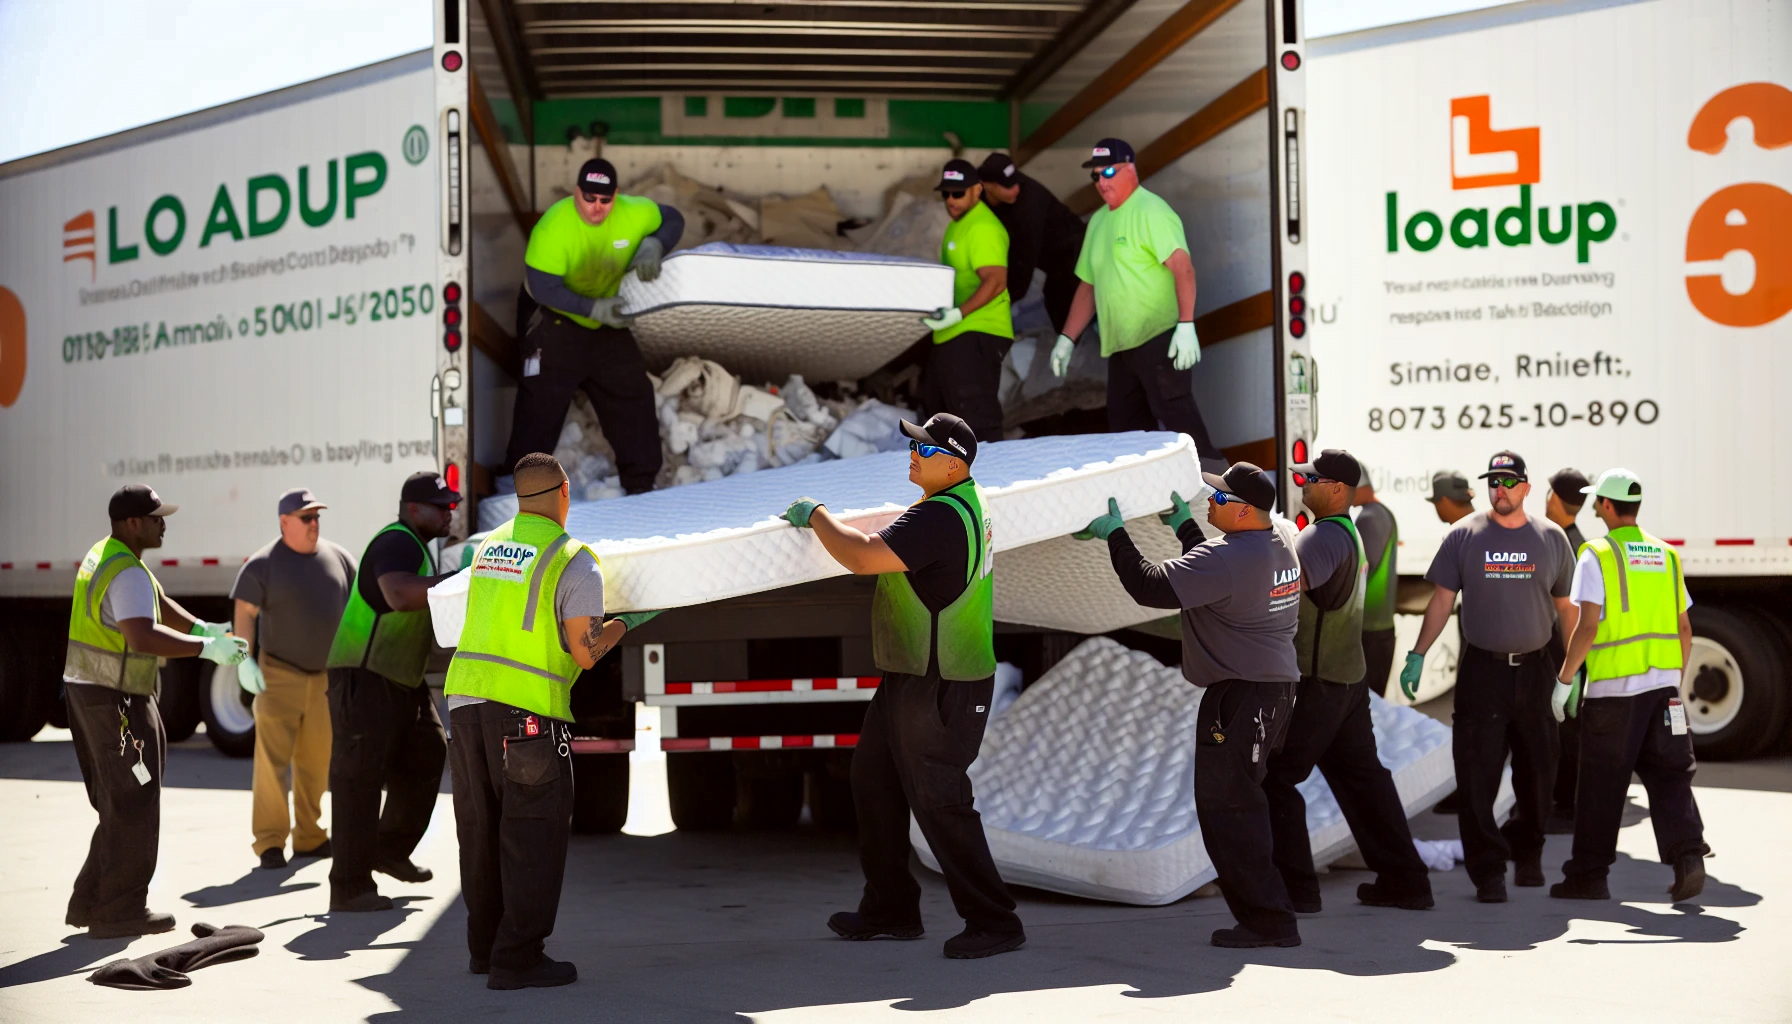 Professional junk removal service for foam mattress toppers